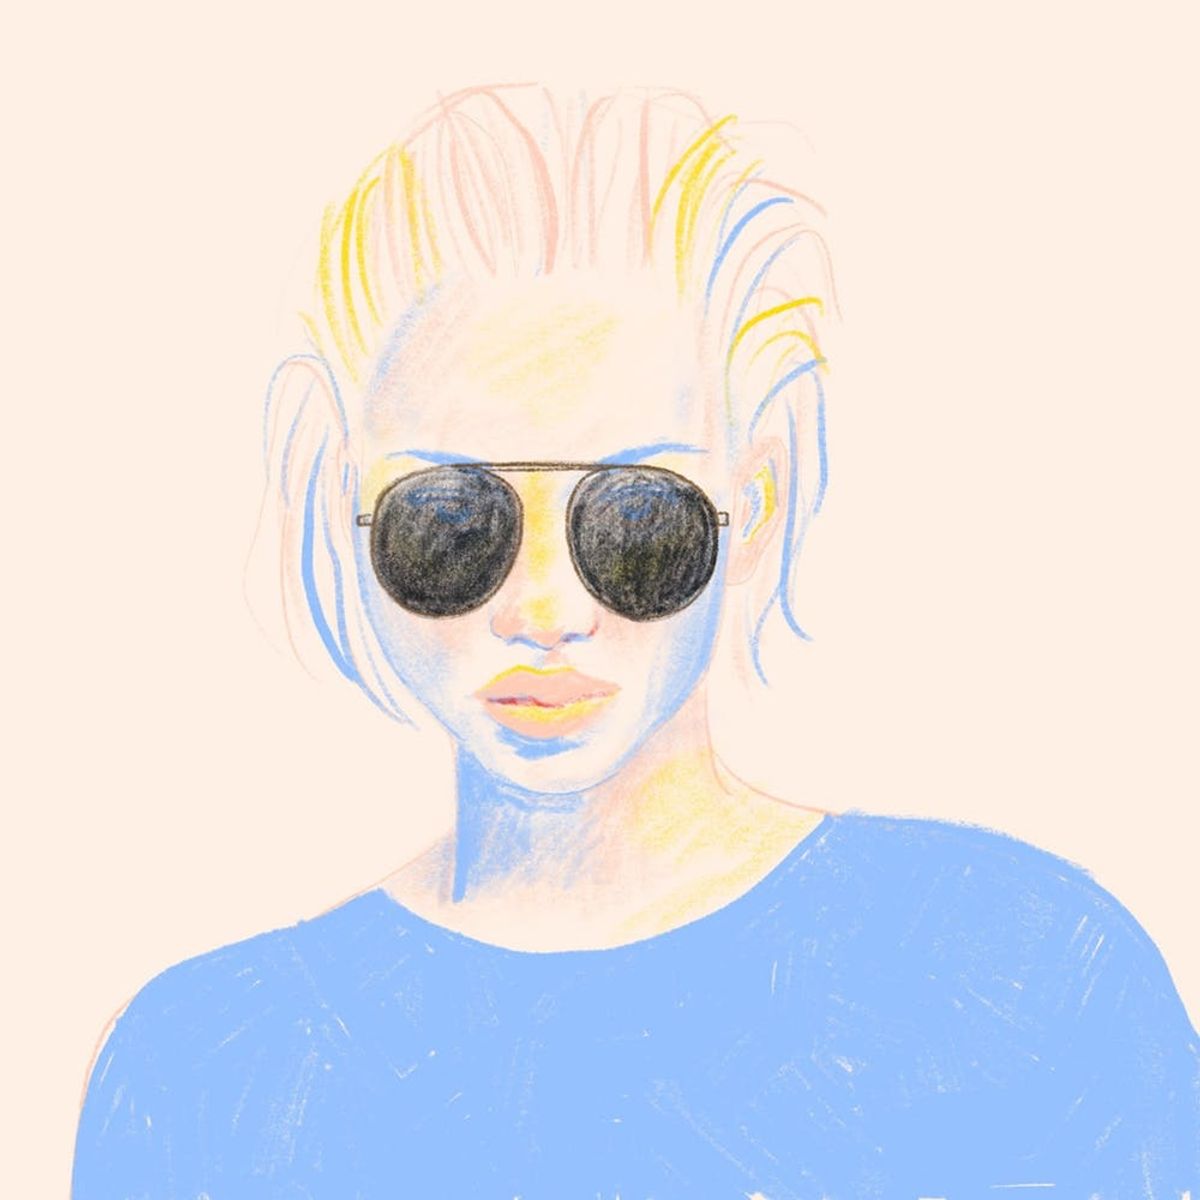 How to *Finally* Find the Right Sunglasses for Your Face Shape